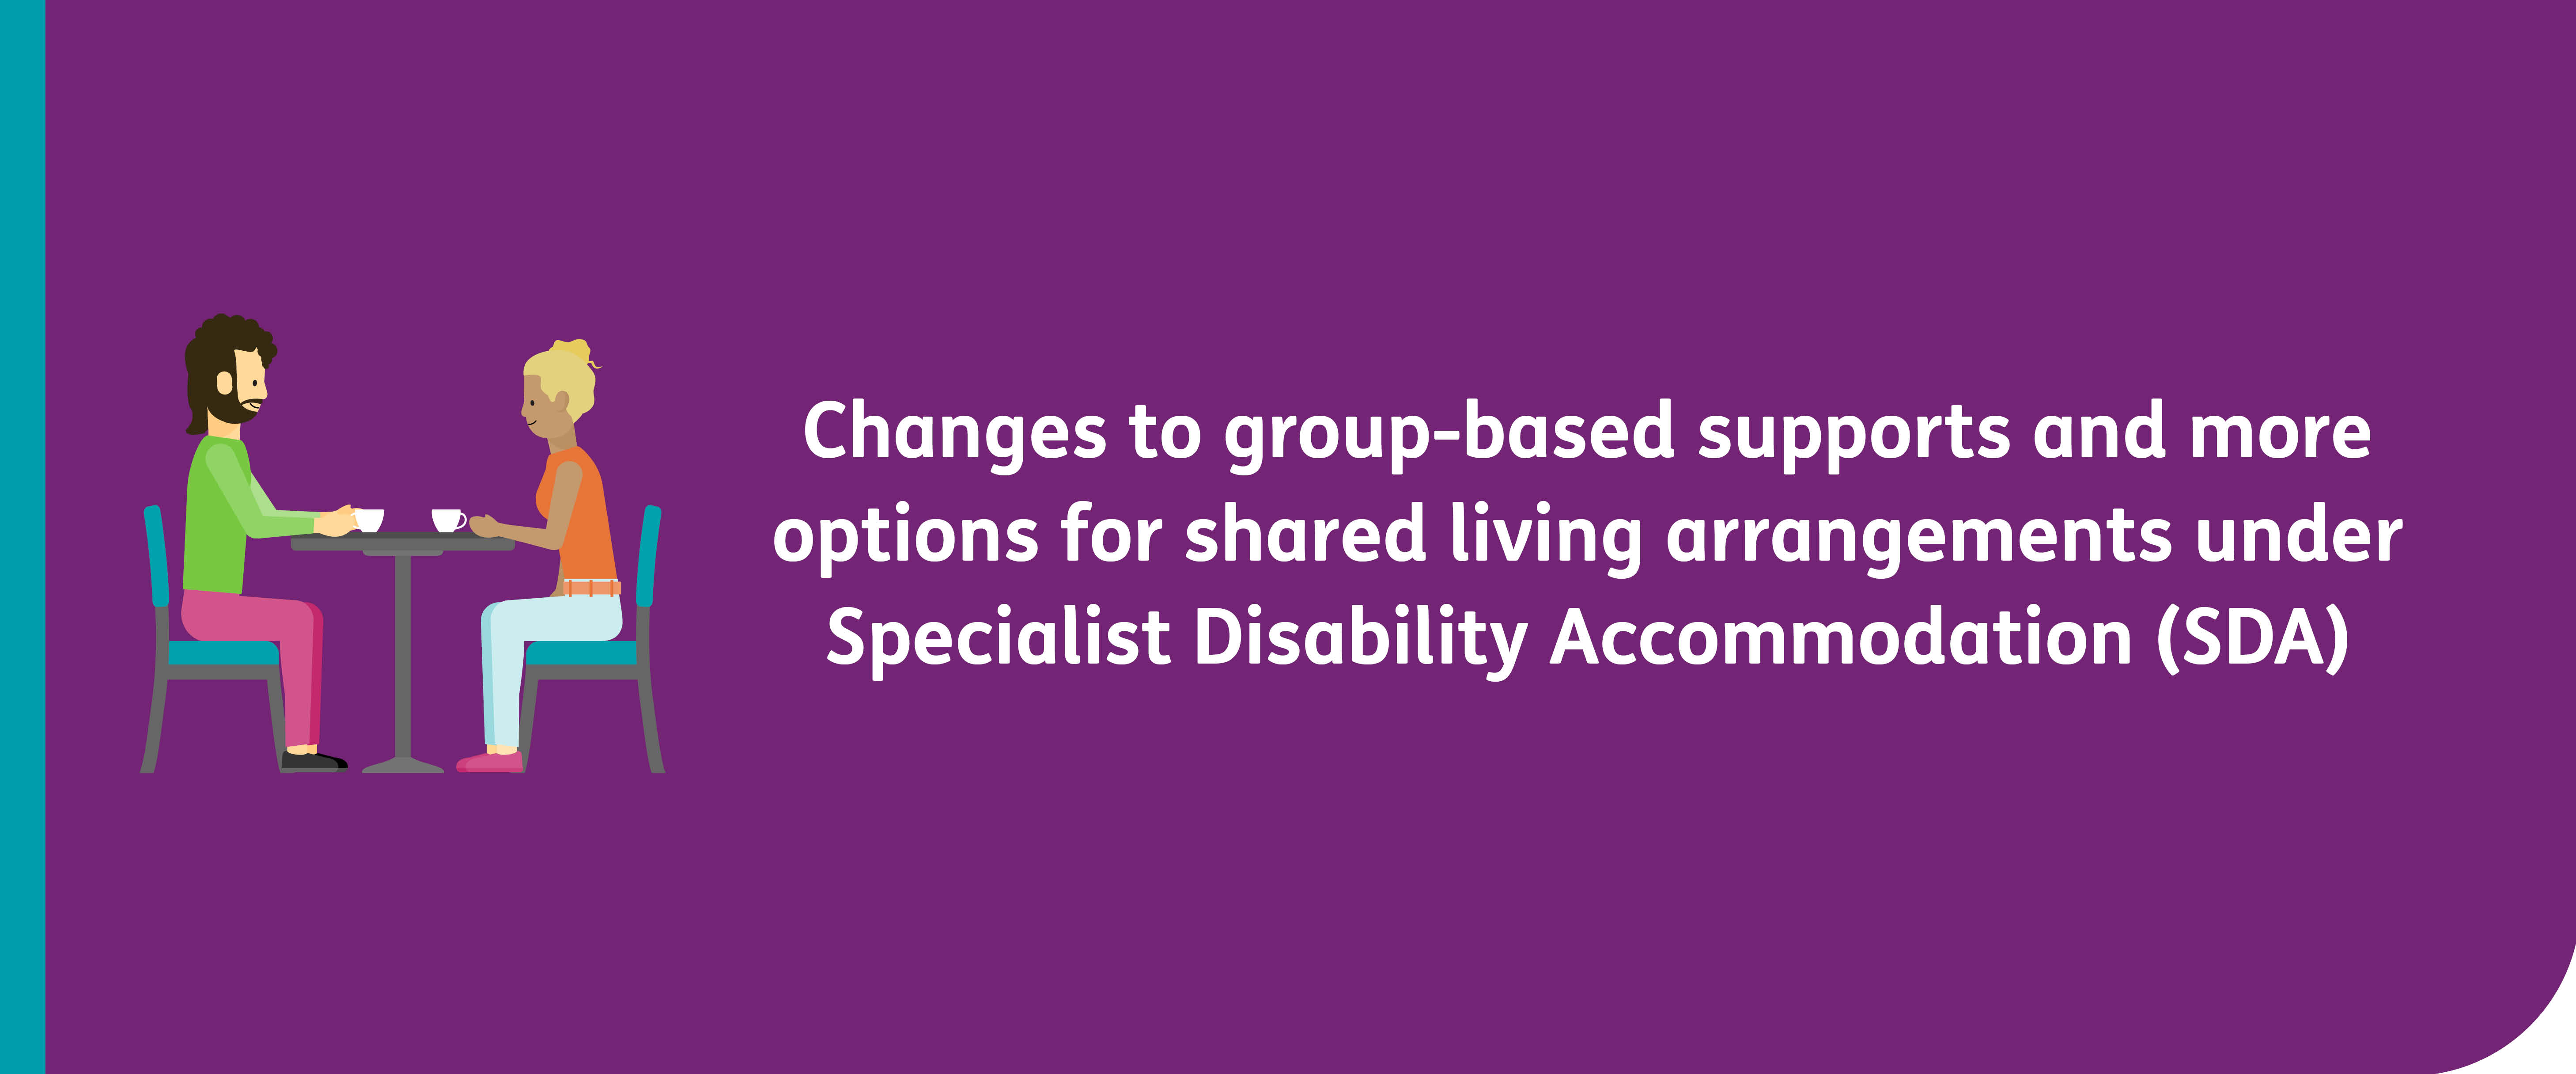 New policy: Changes to group-based supports and more options for shared living arrangements under Specialist Disability Accommodation (SDA) with a cartoon of 2 people drinking tea